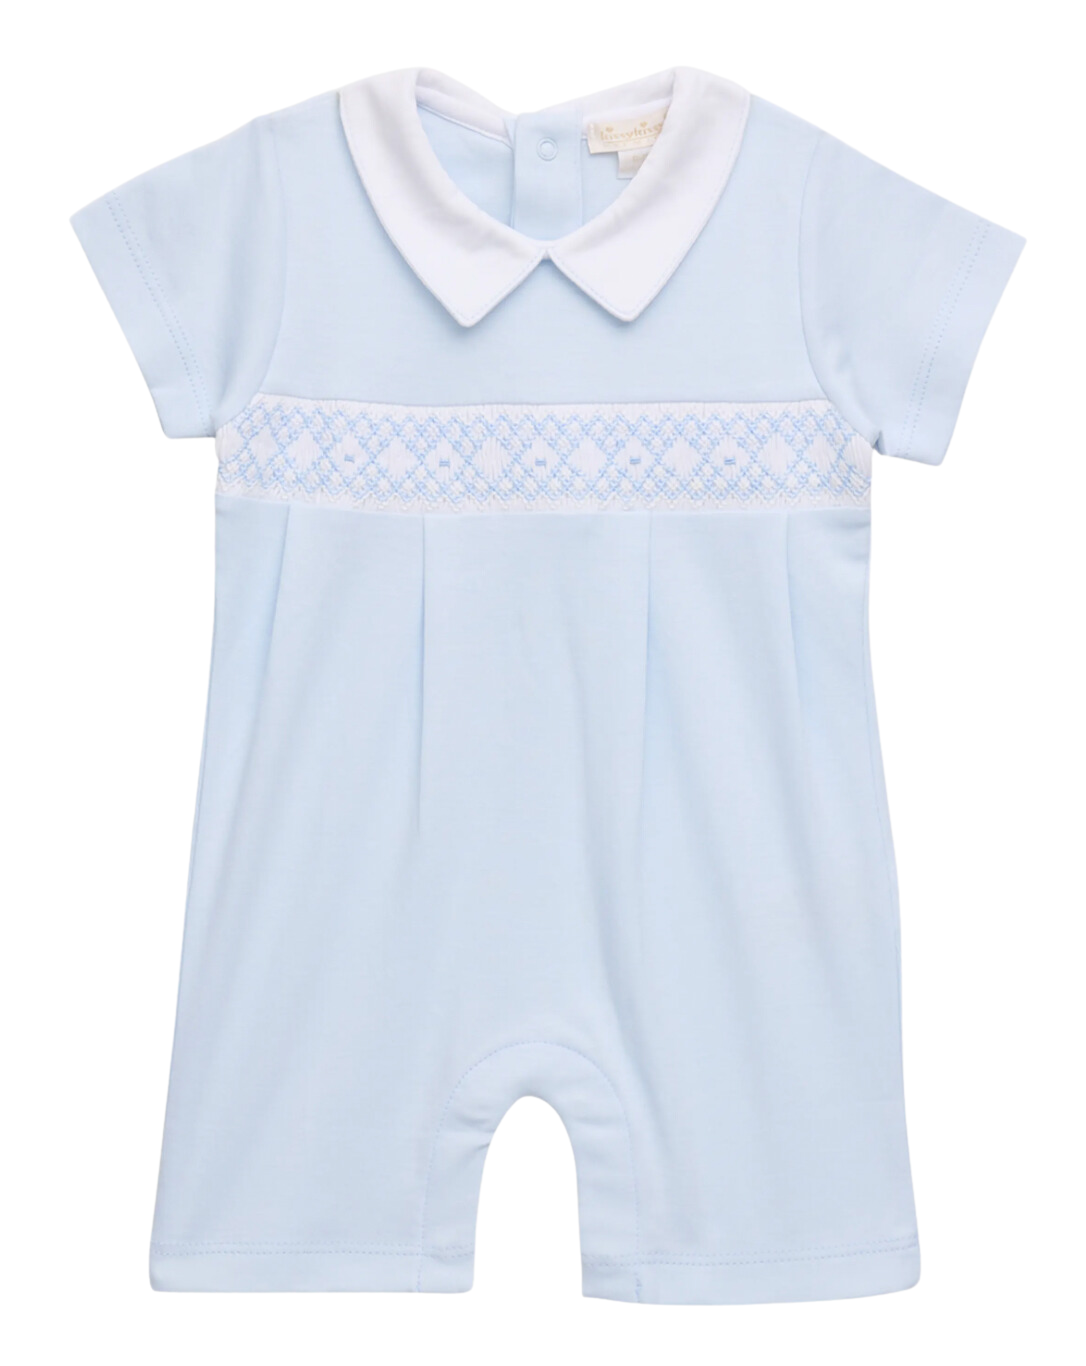 CLB short playsuit with hand smock